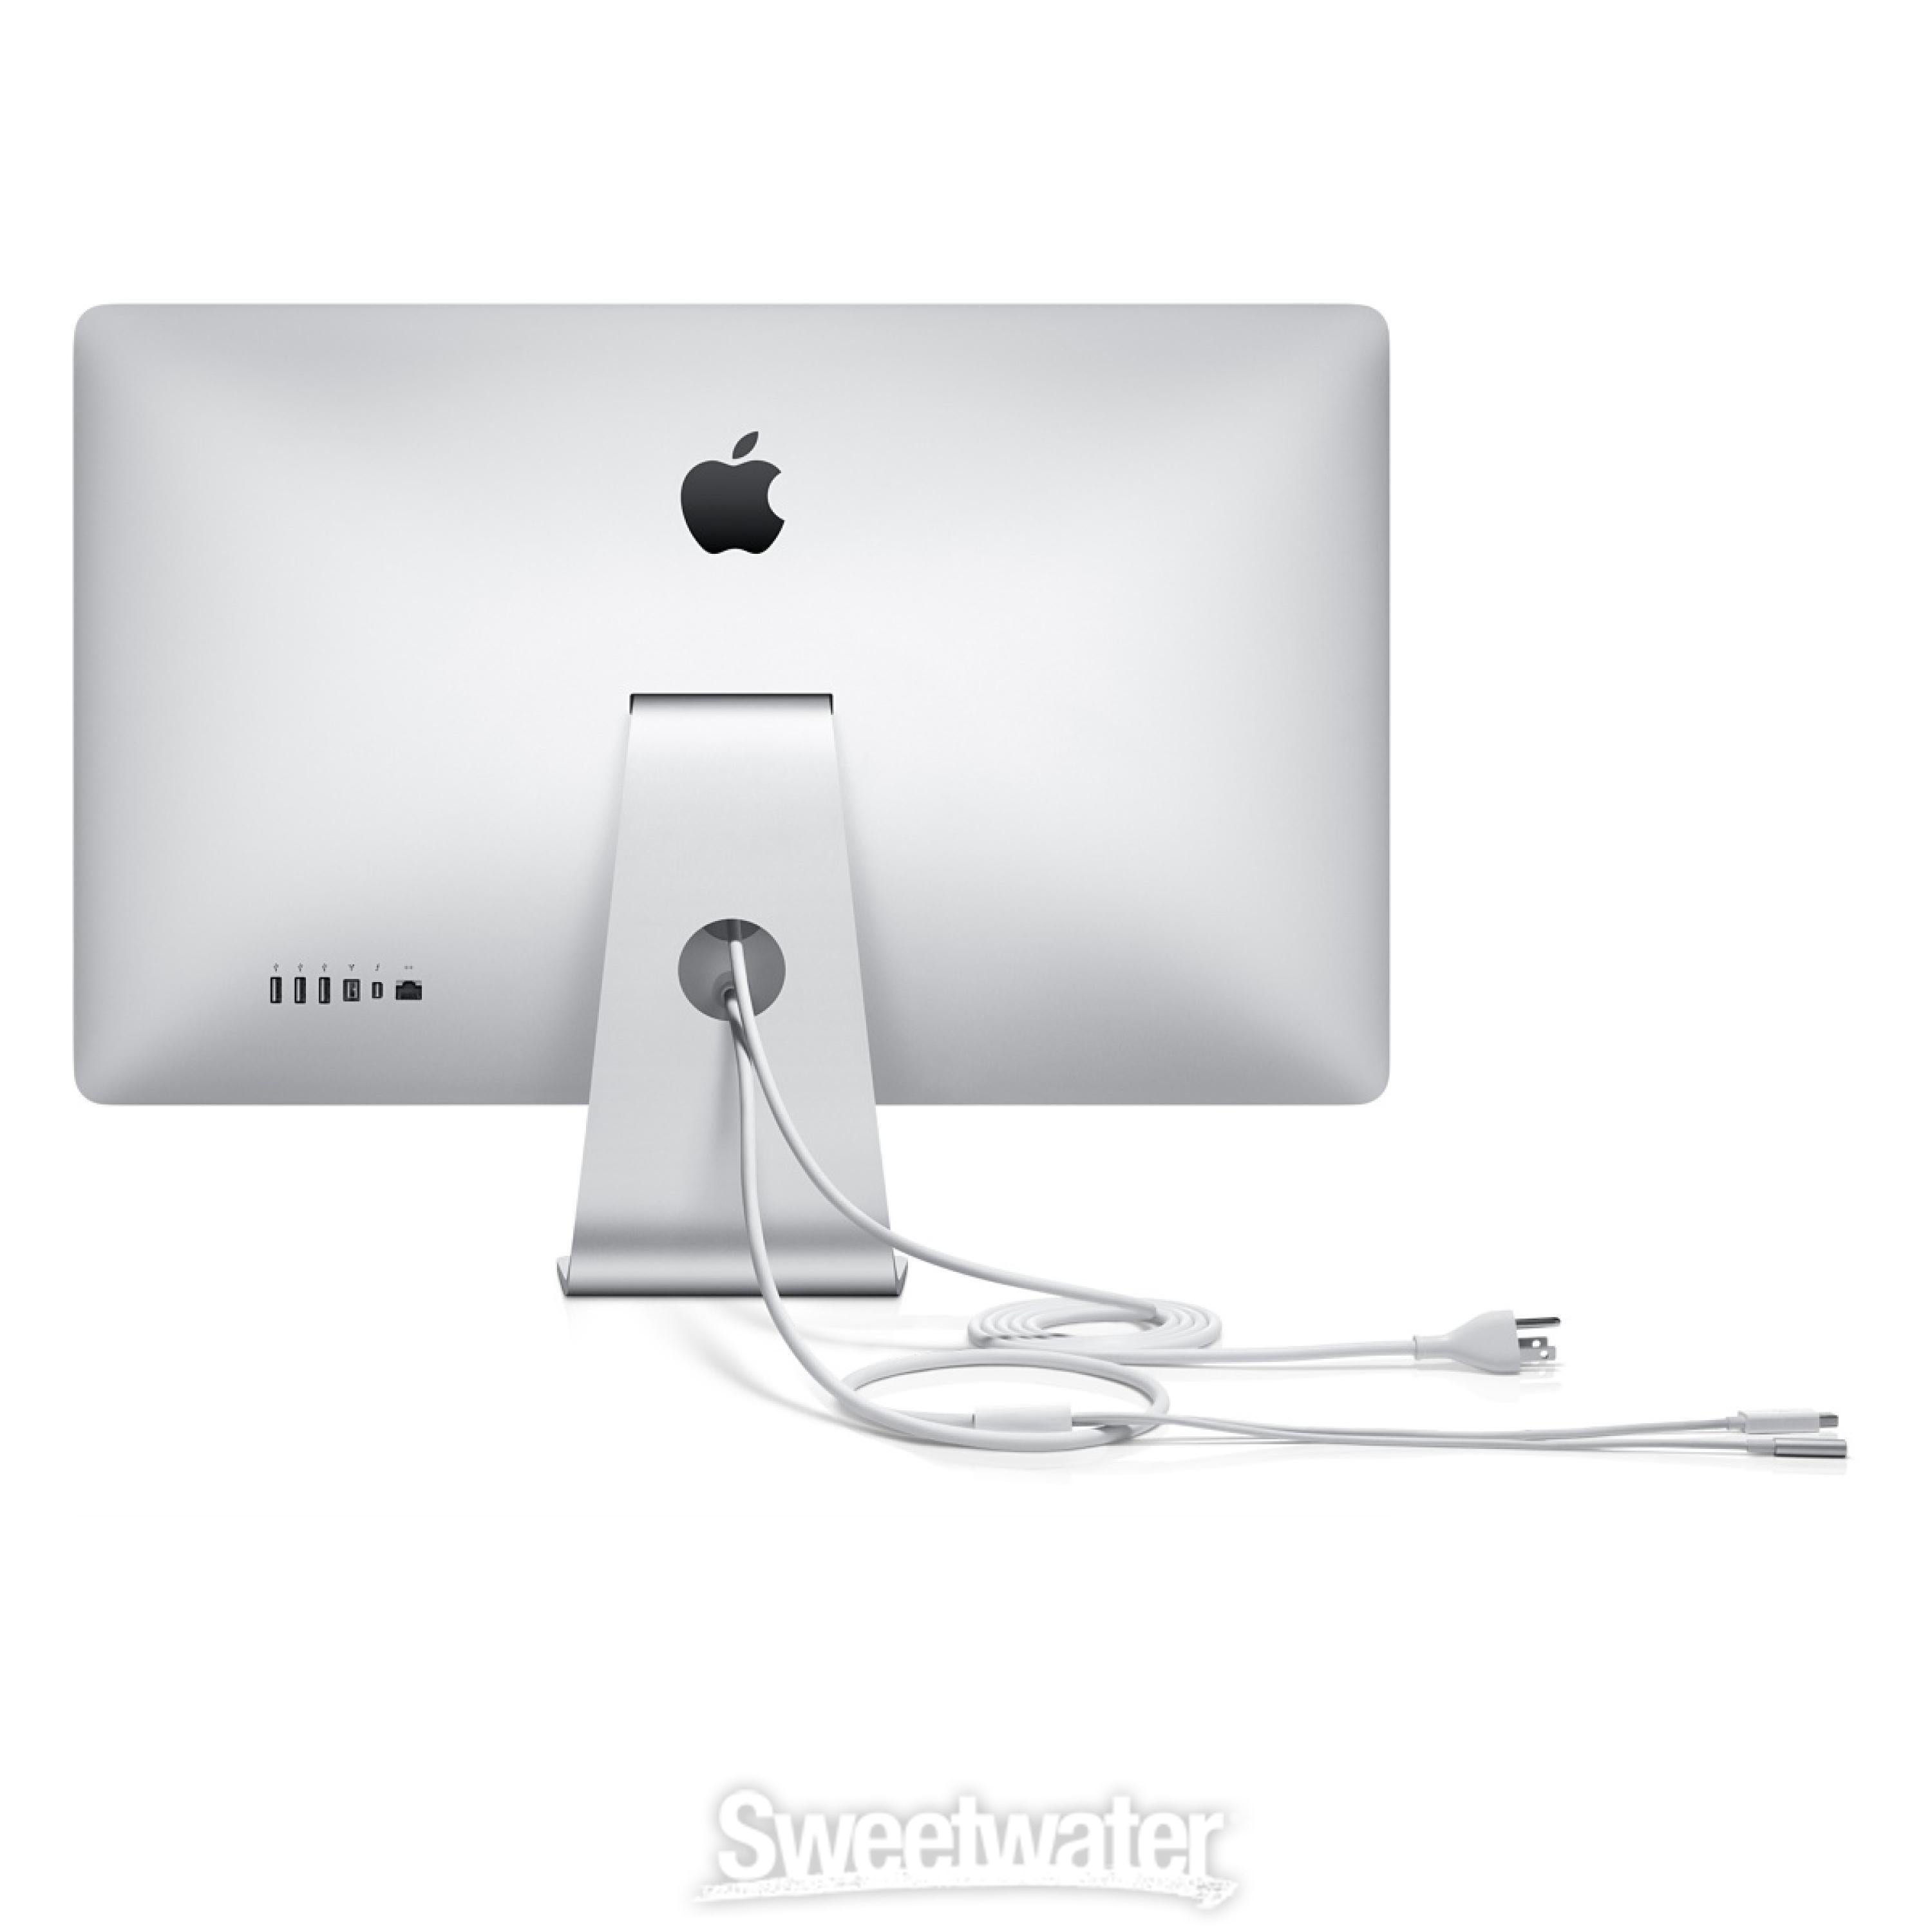 Apple Thunderbolt Display | Sweetwater